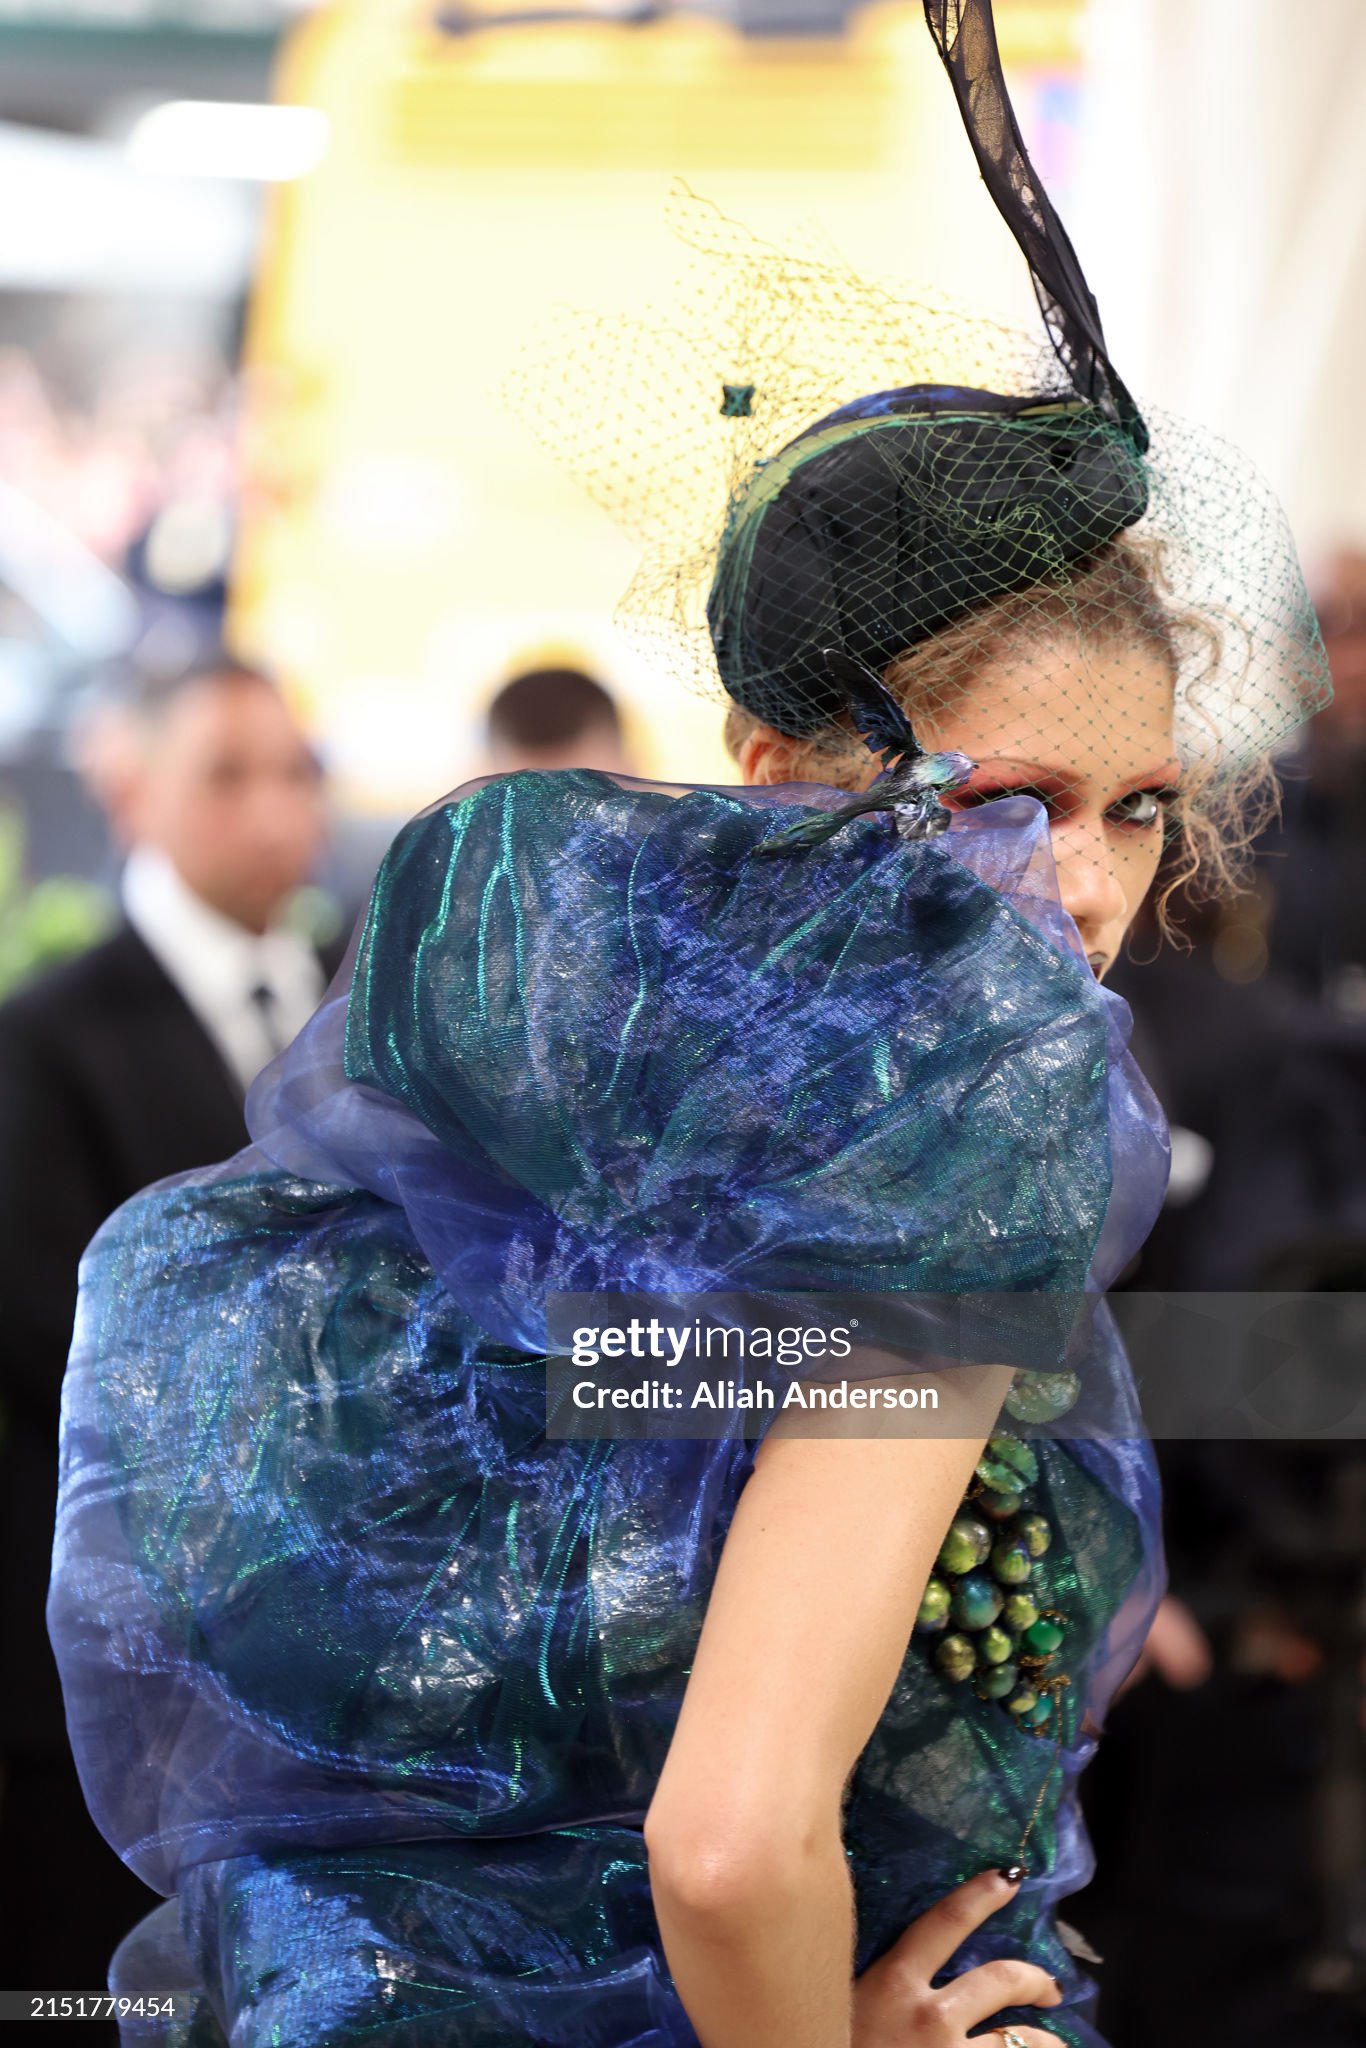 gettyimages-2151779454-2048x2048.jpg